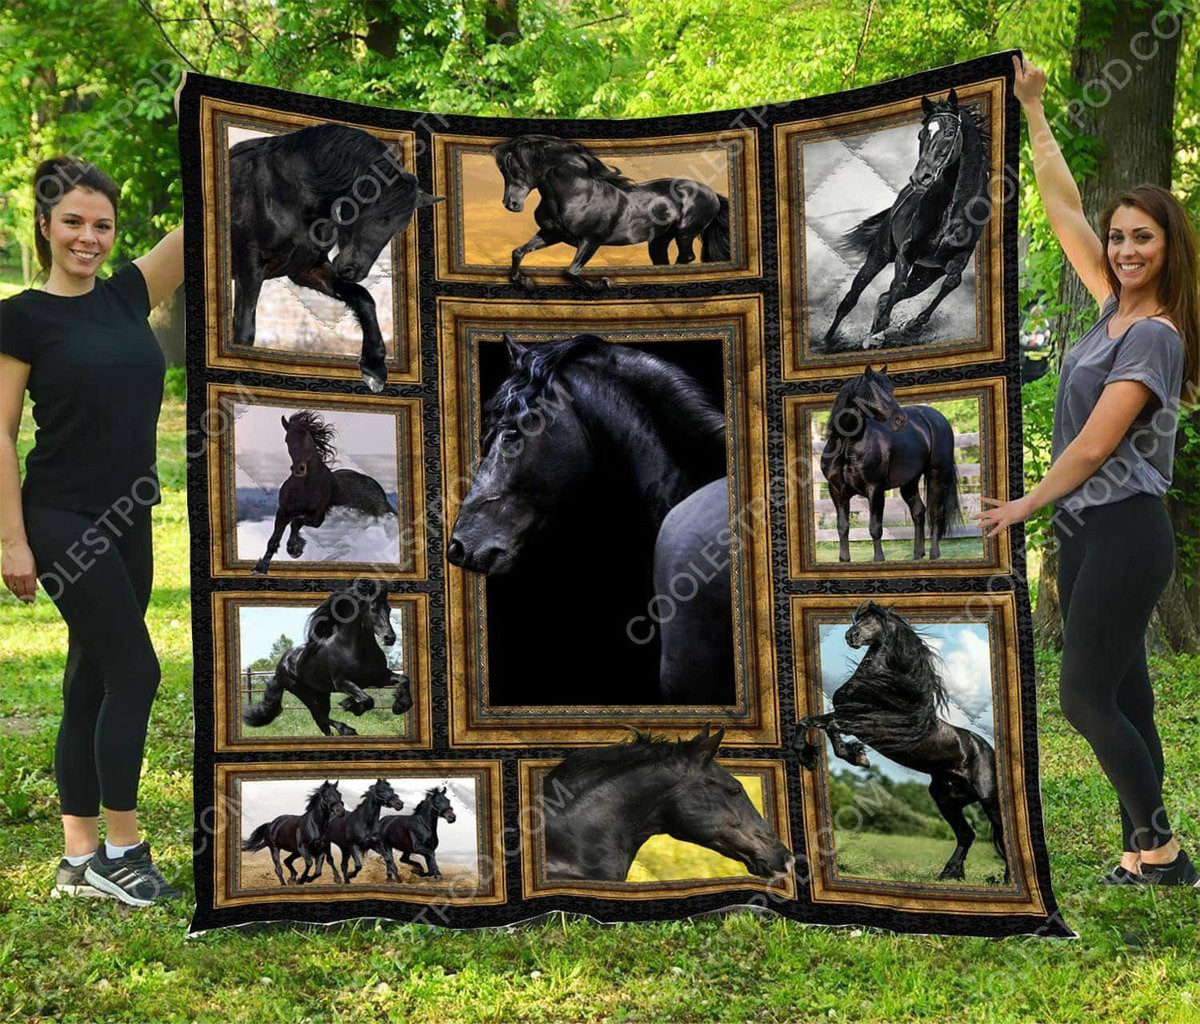 horse-black-angels-ttgg387-awesome-quilt